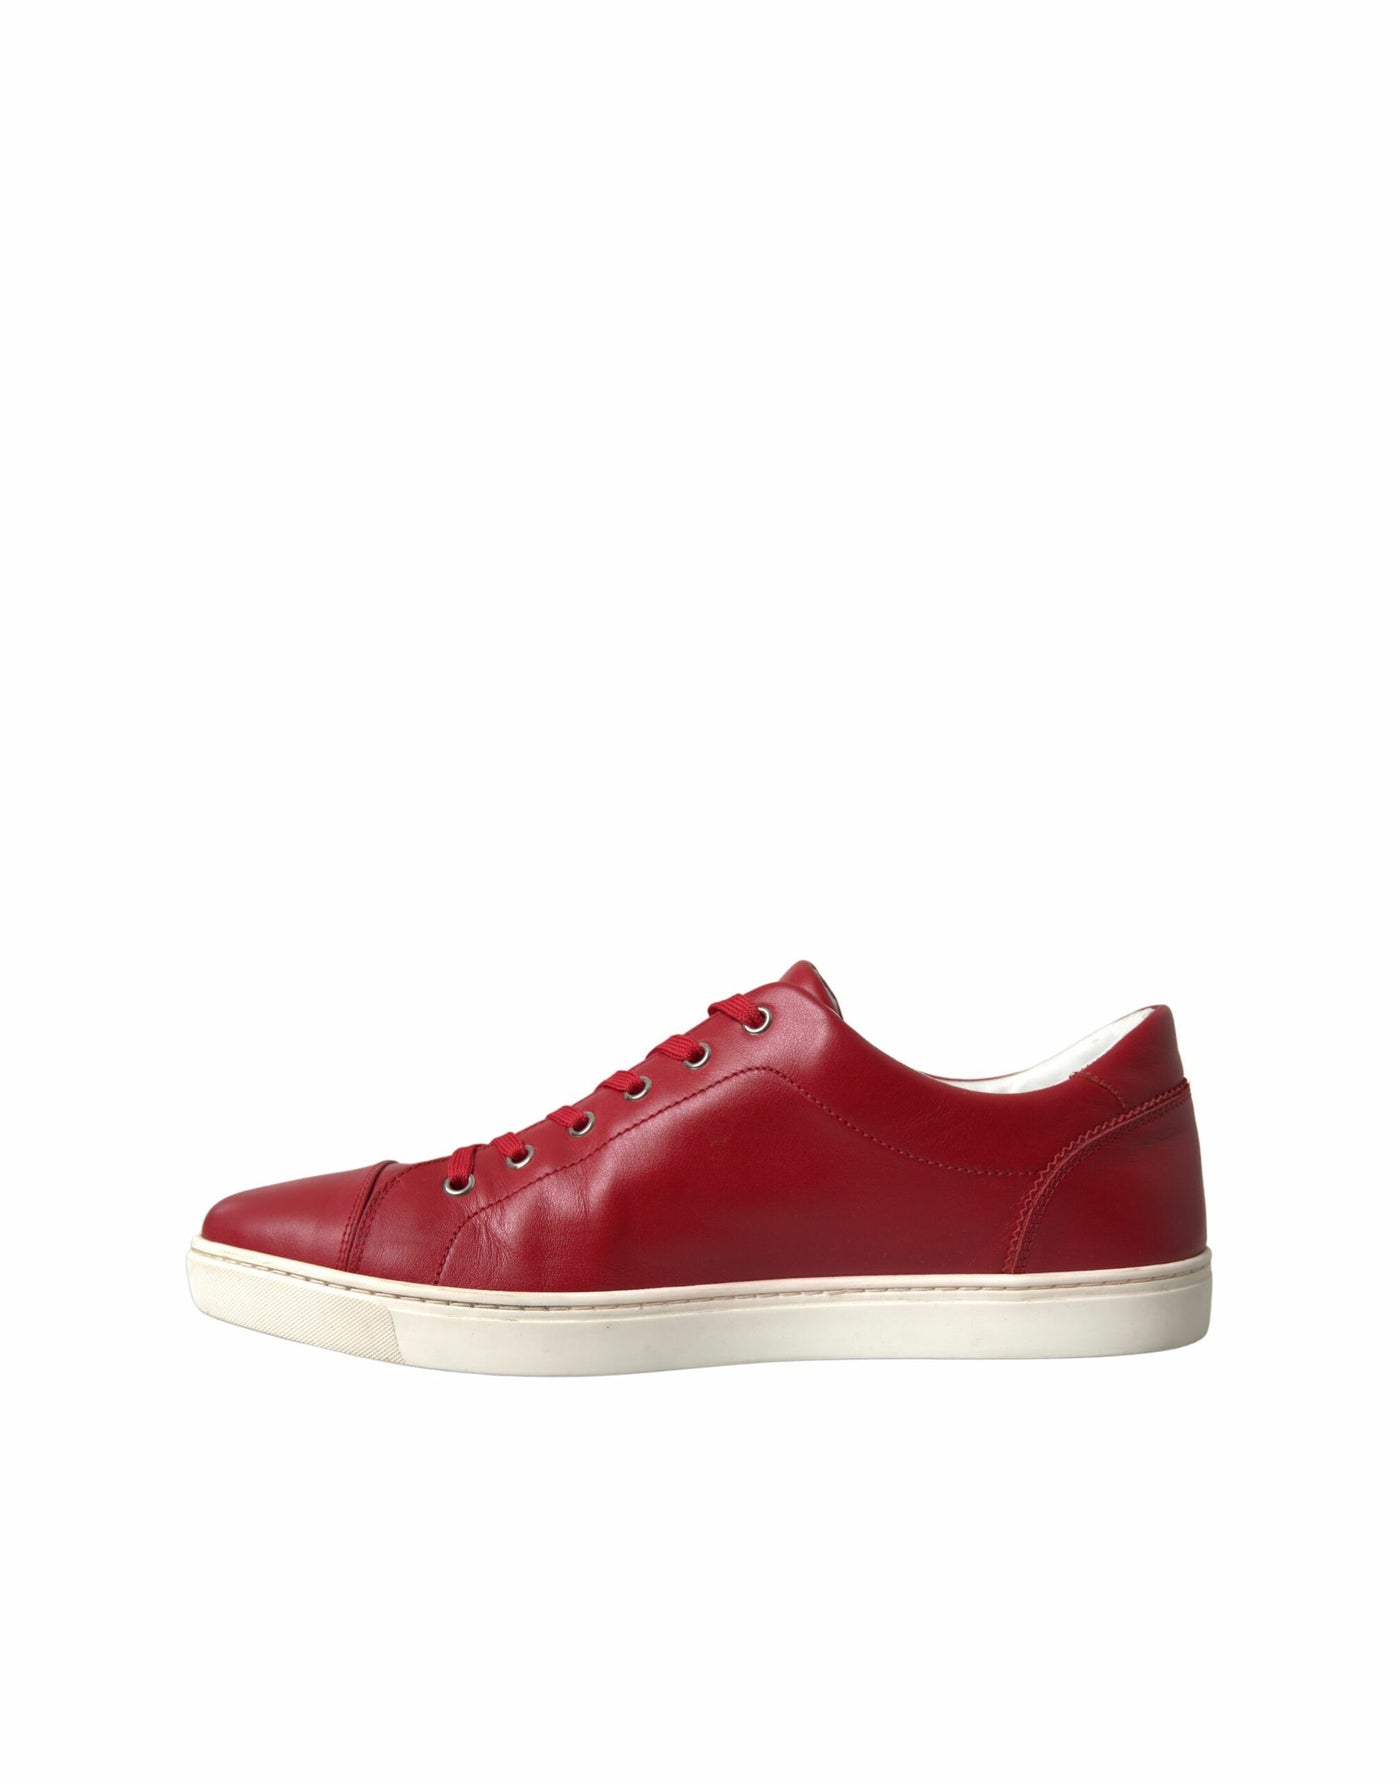 Dolce & Gabbana Shoes Red Portofino Leather Low Top Mens Sneakers